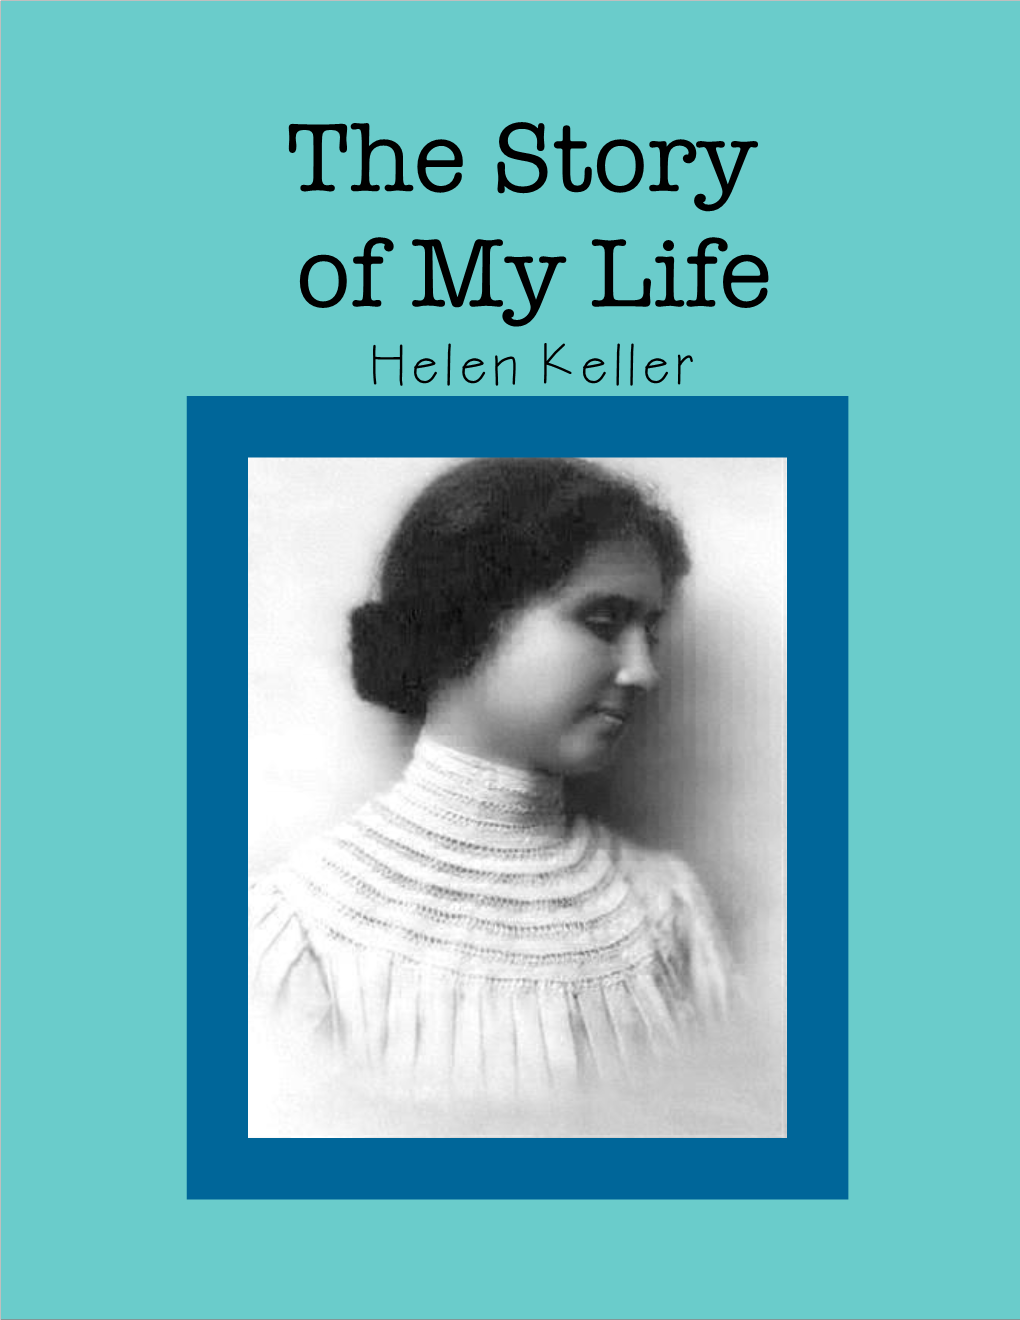 The Story of My Life – Helen Keller the Story of My Life Helen Keller